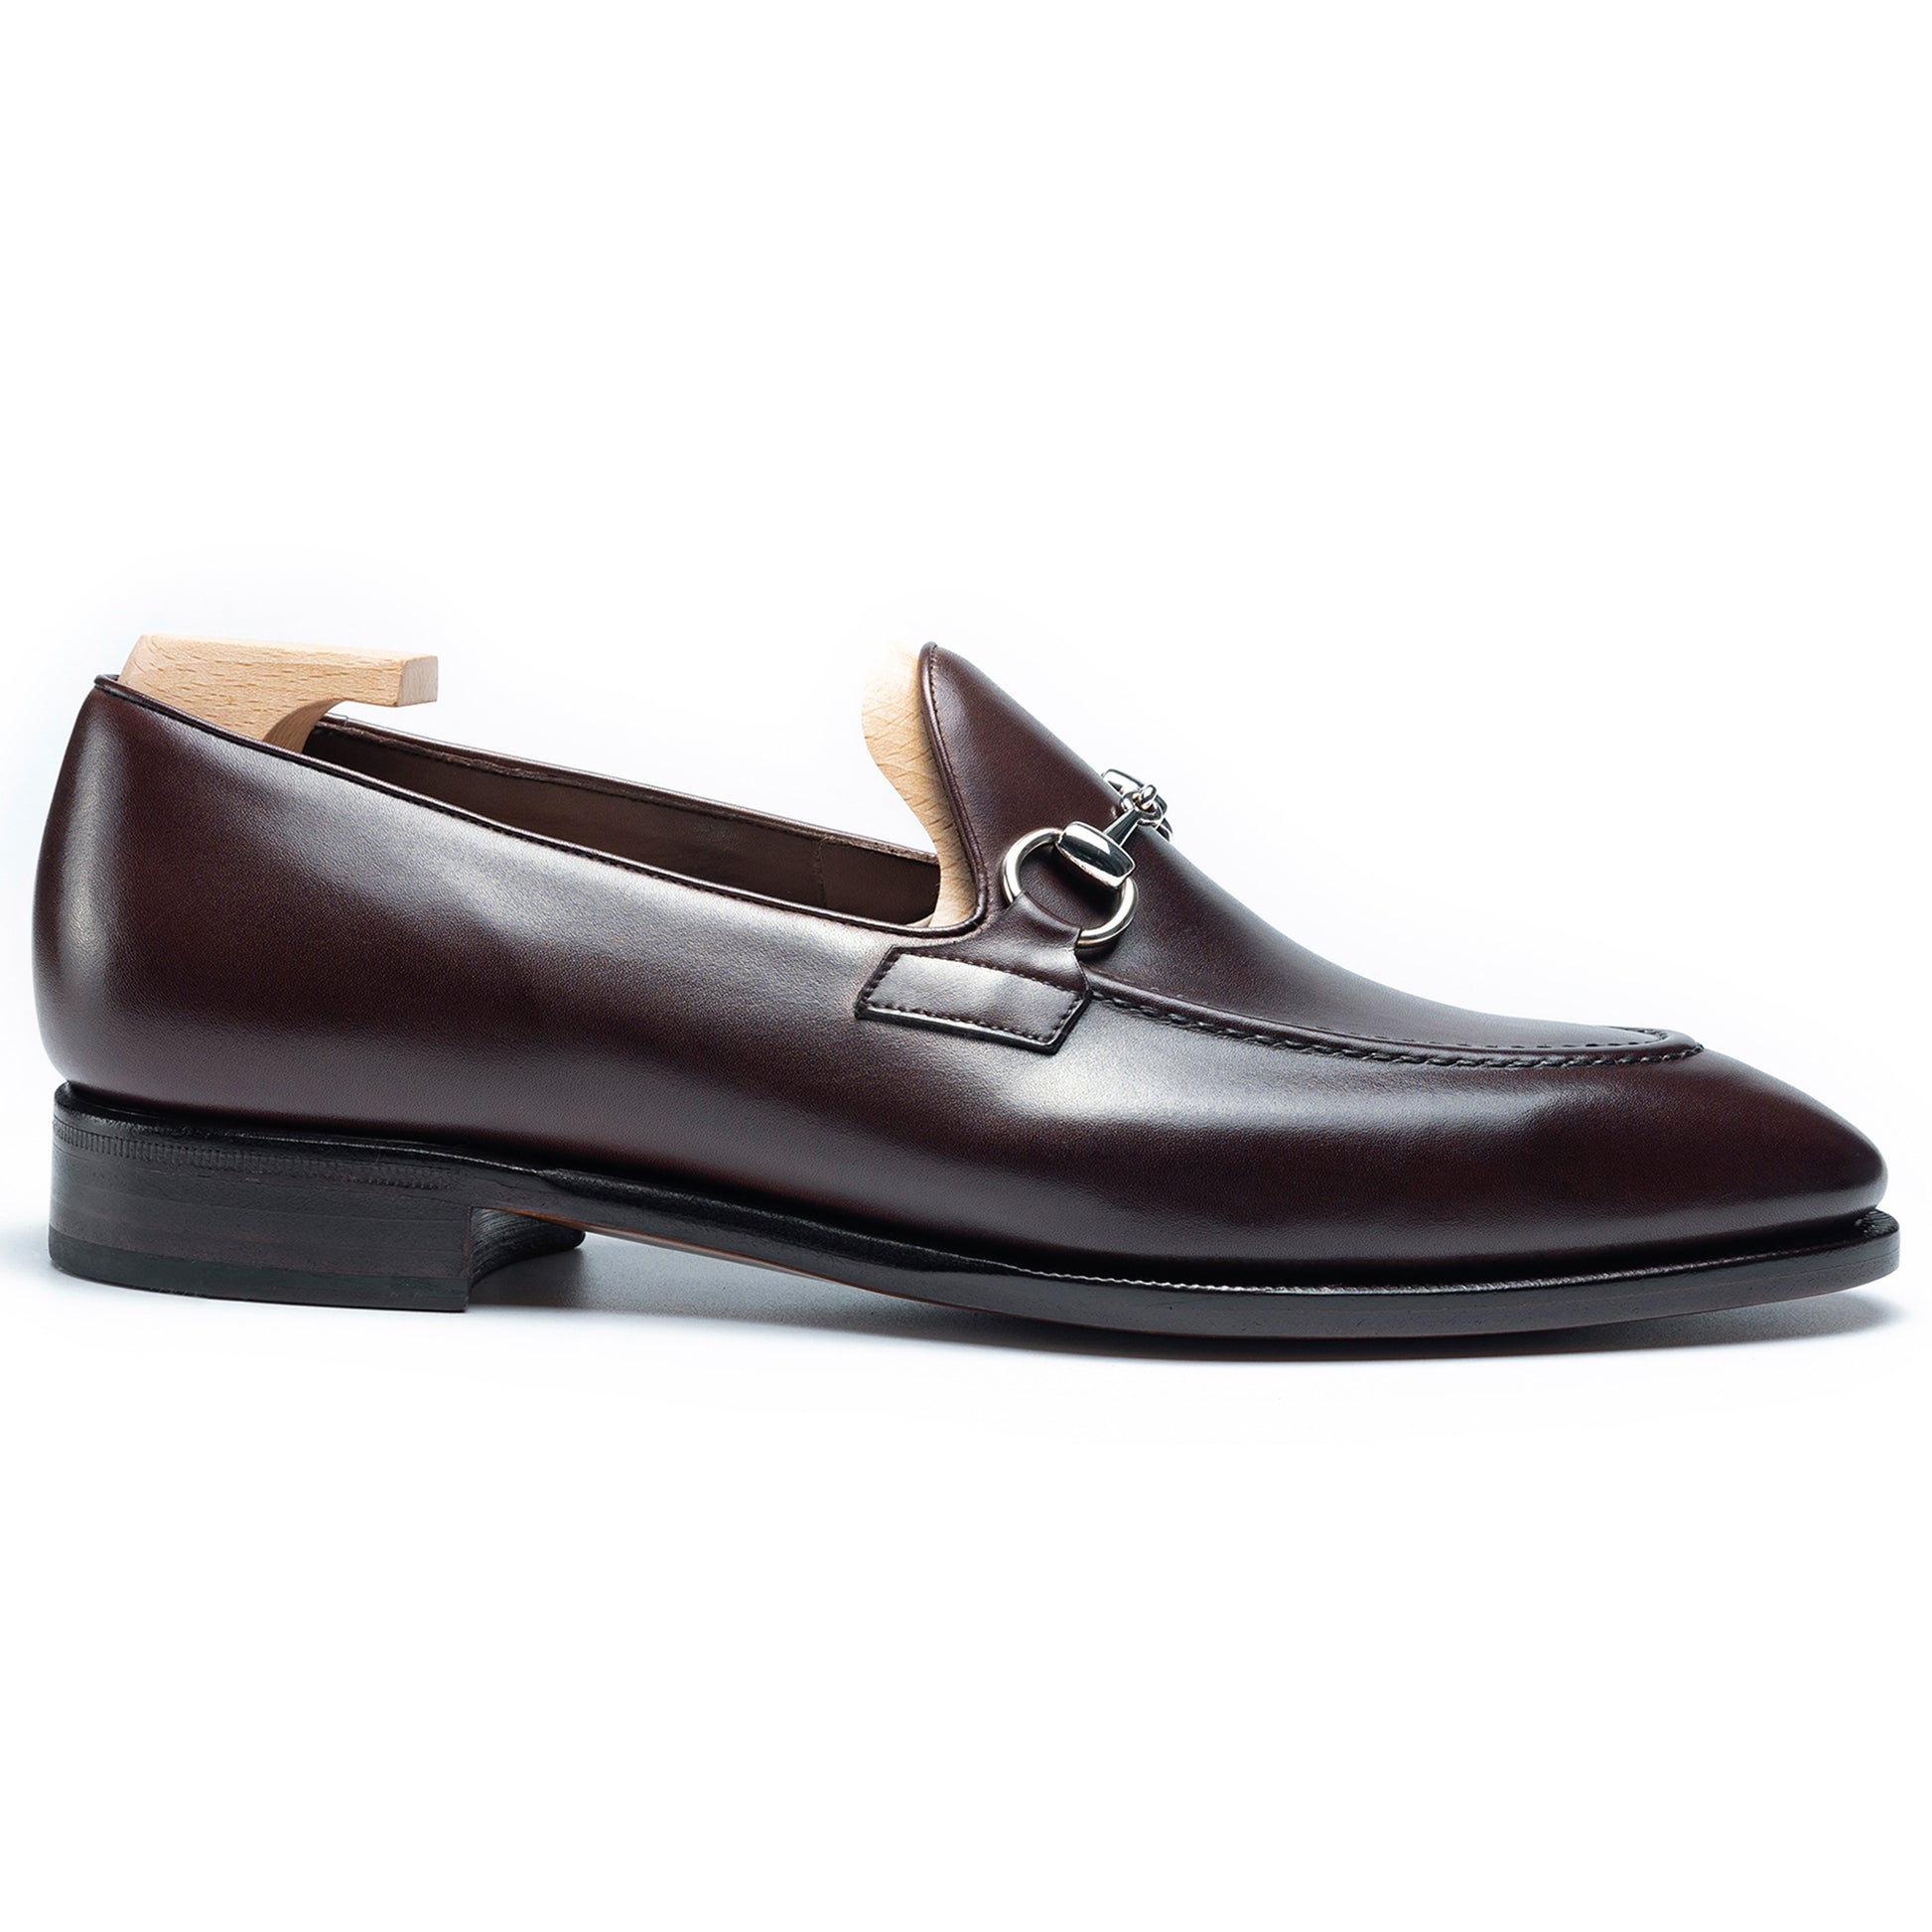 TLB Mallorca, Men's Leather loafers, Men's leather shoes